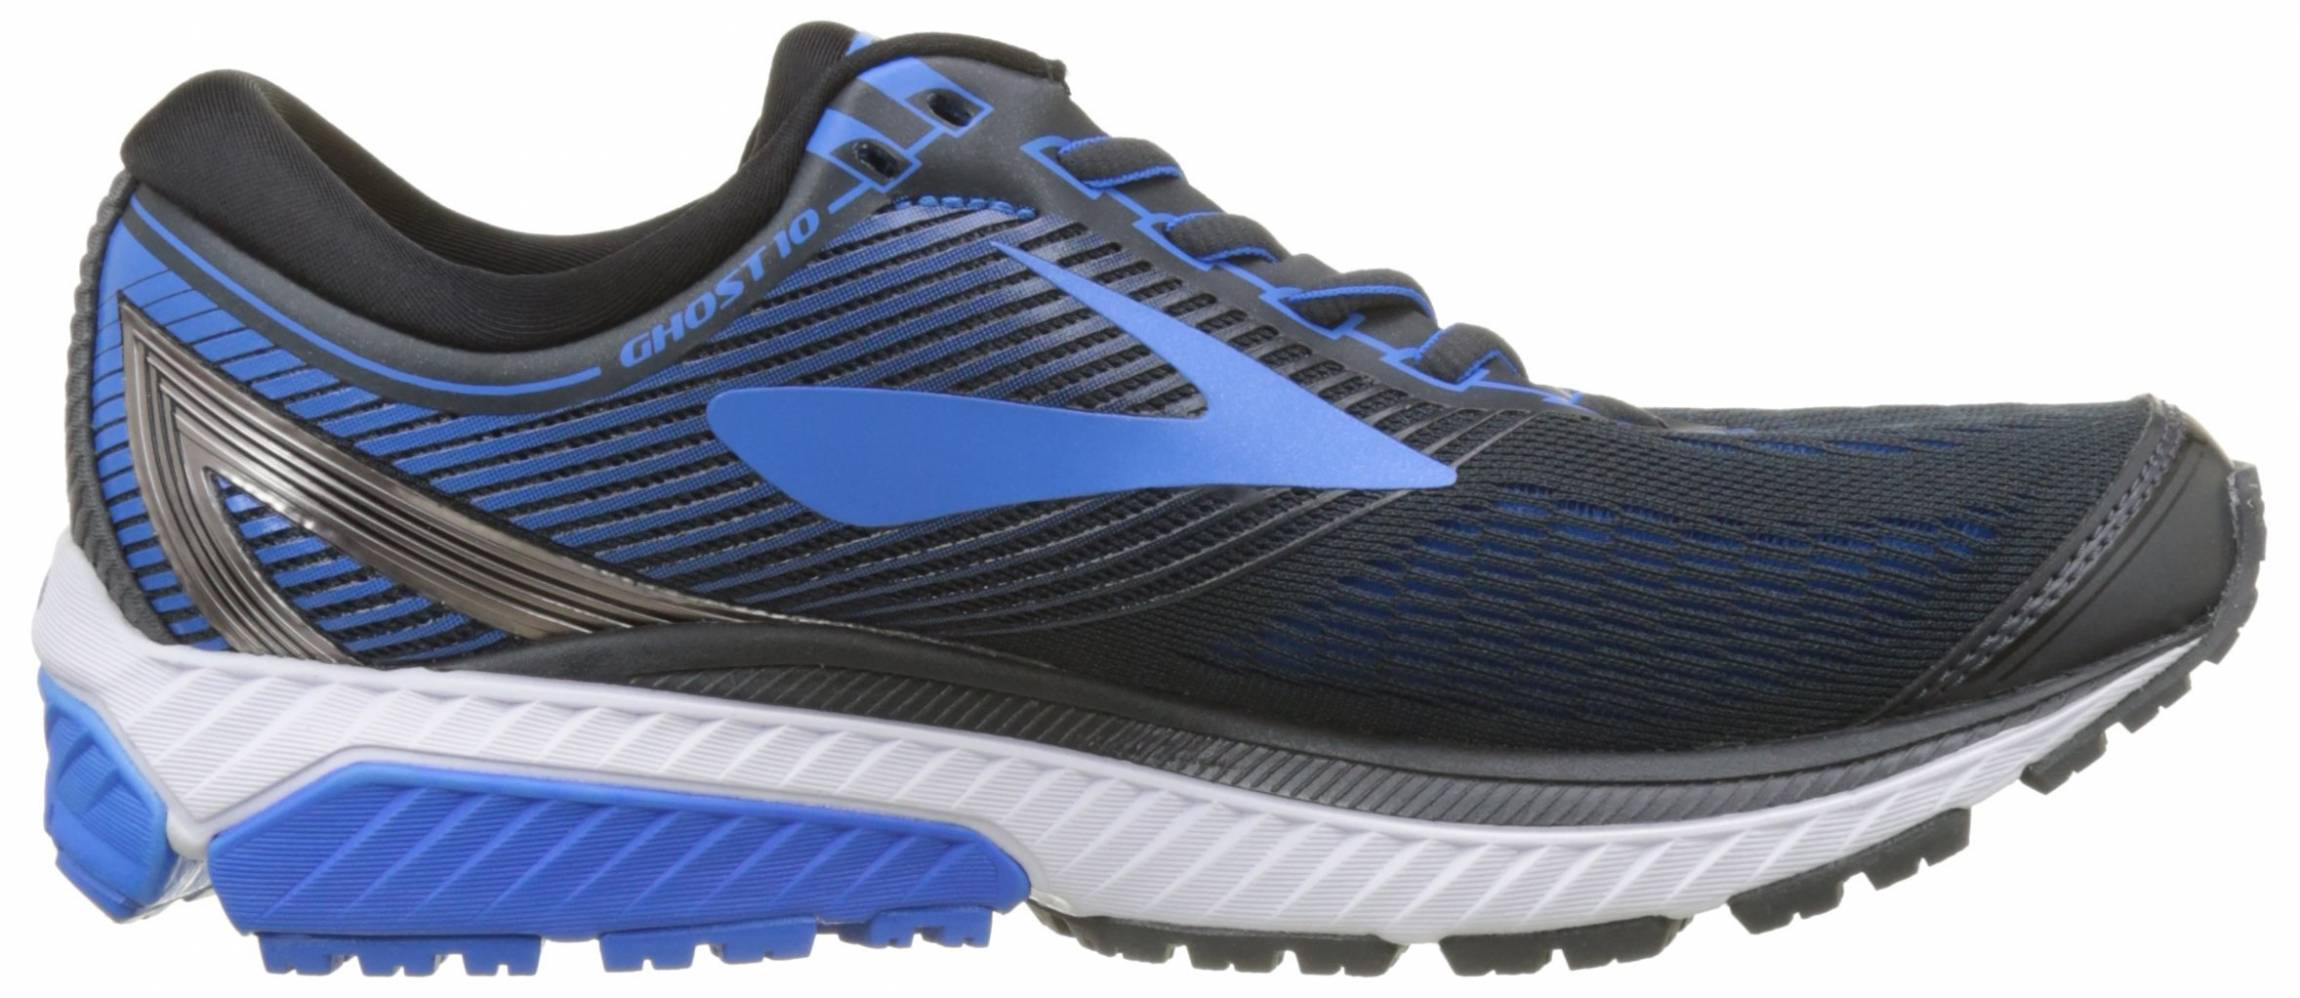 Only $105 + Review of Brooks Ghost 10 